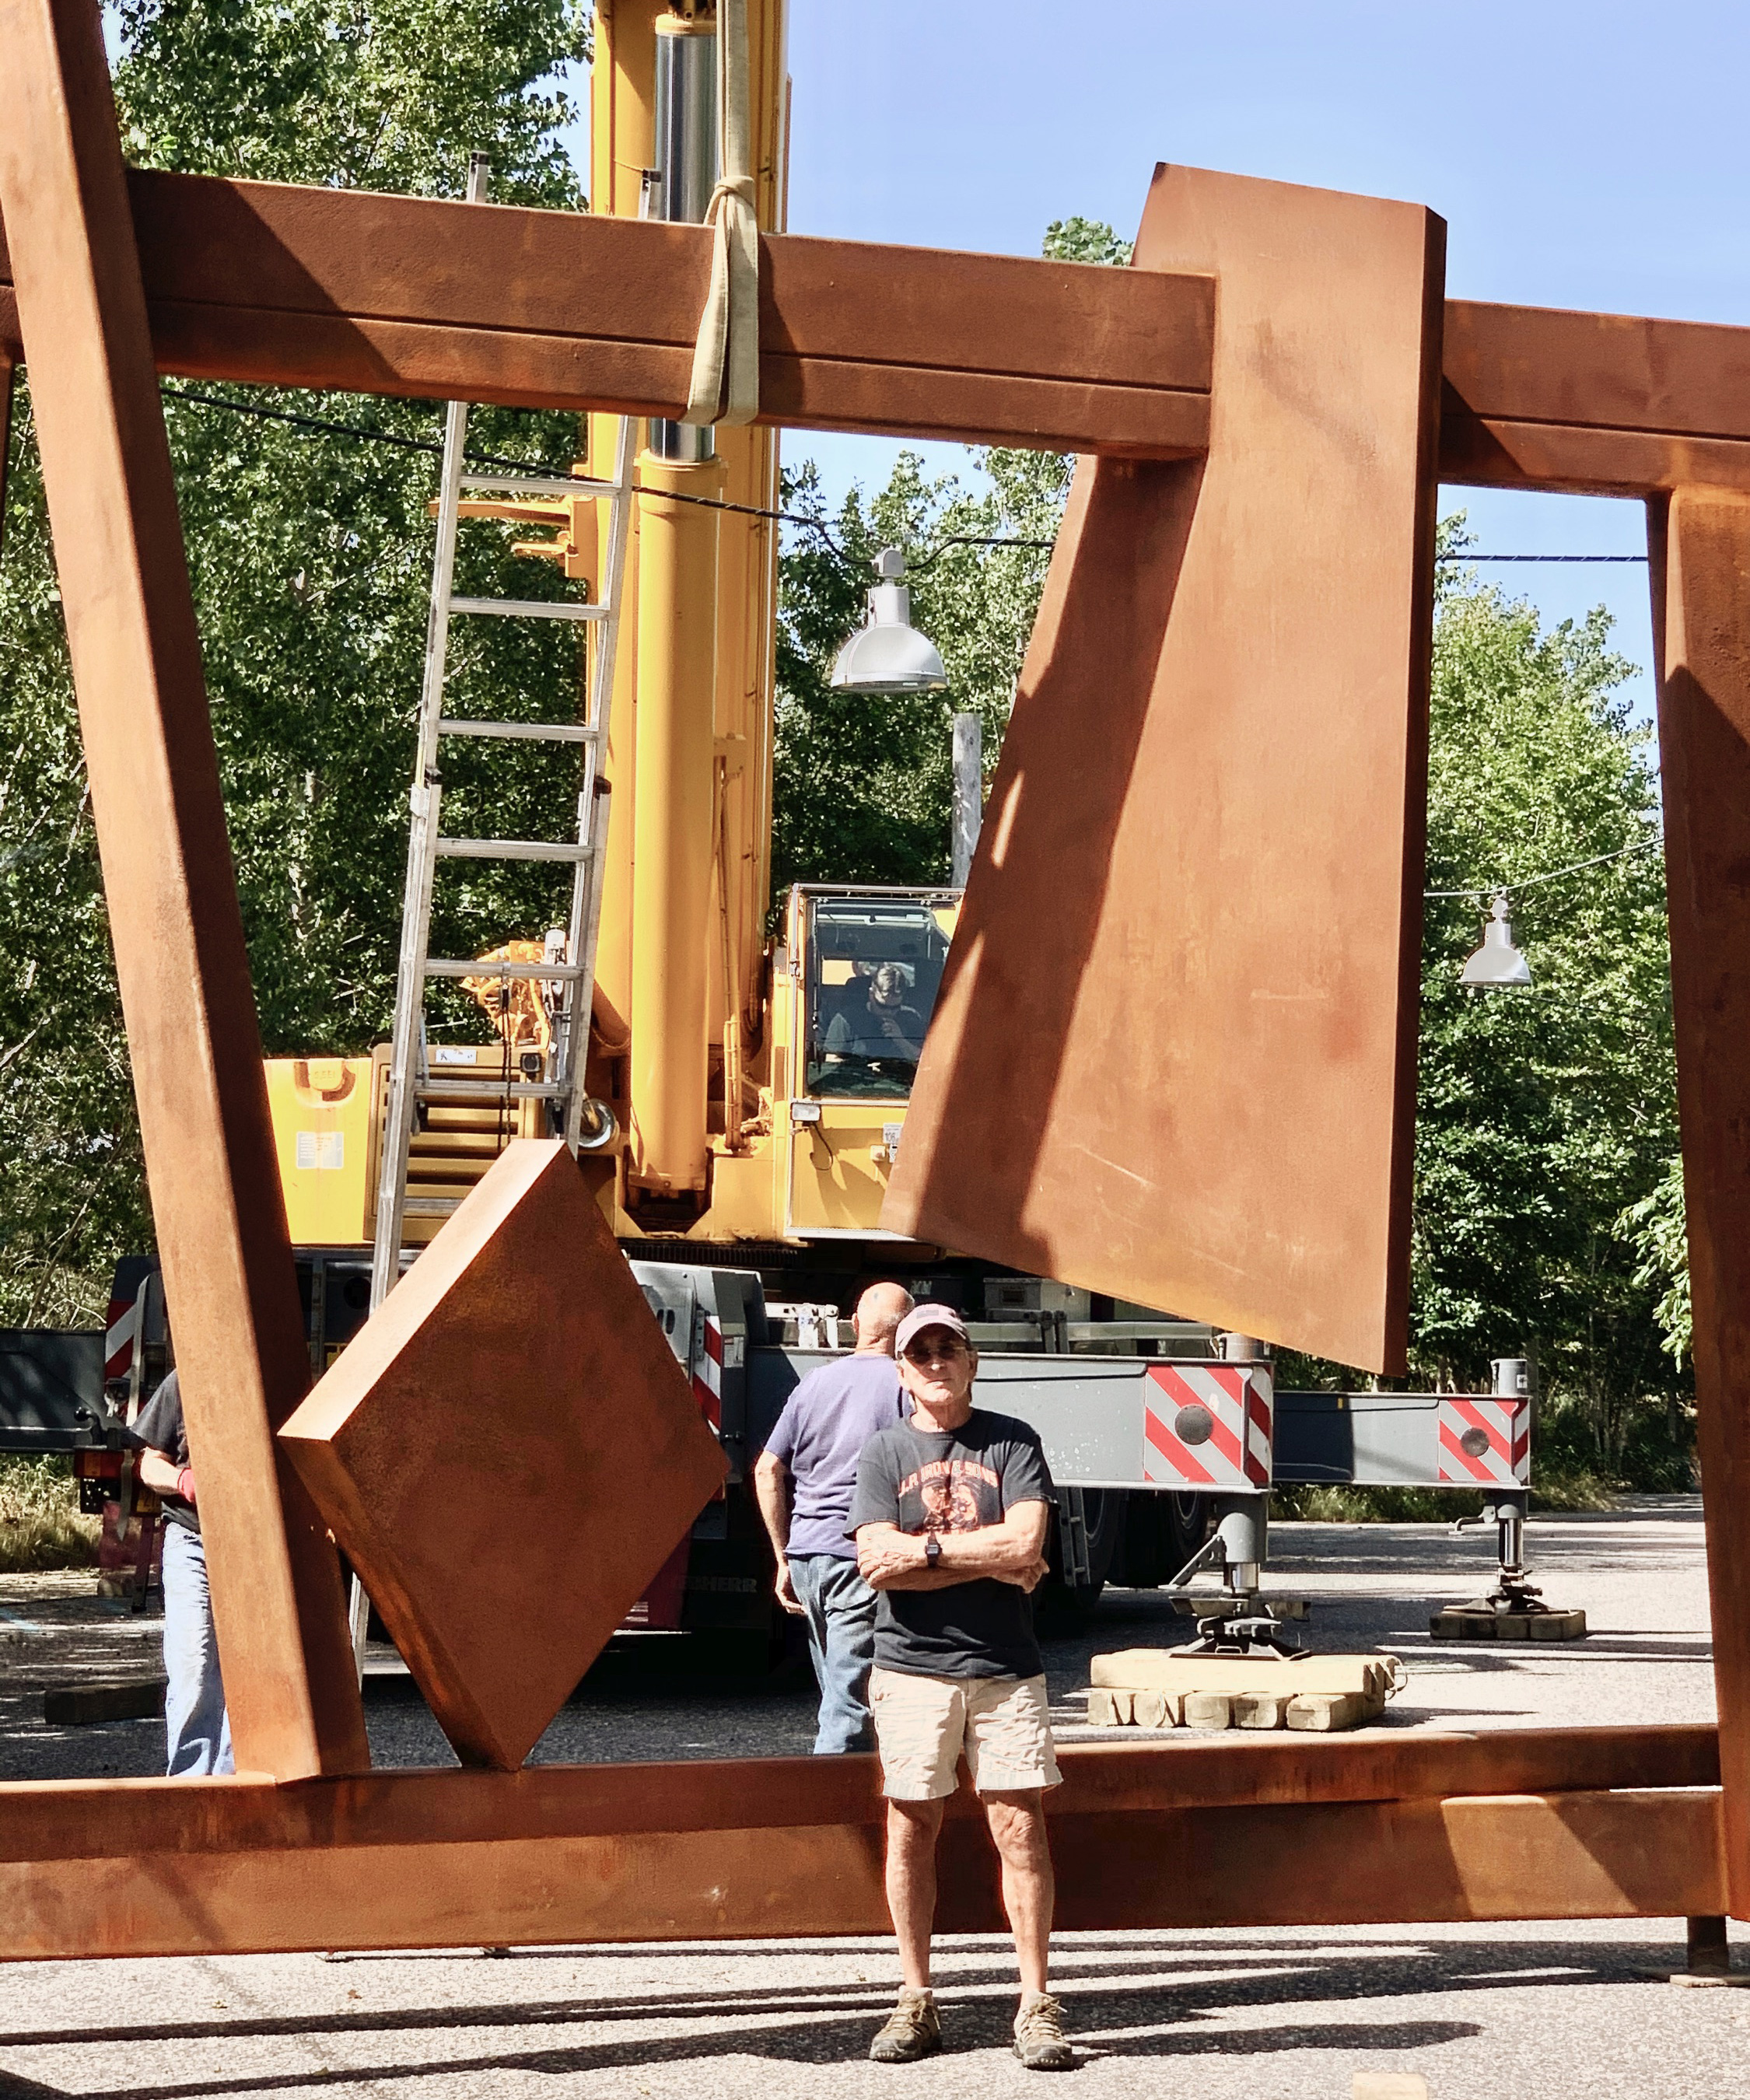 Man standing in front of a large metal sculpture being installed with machinery